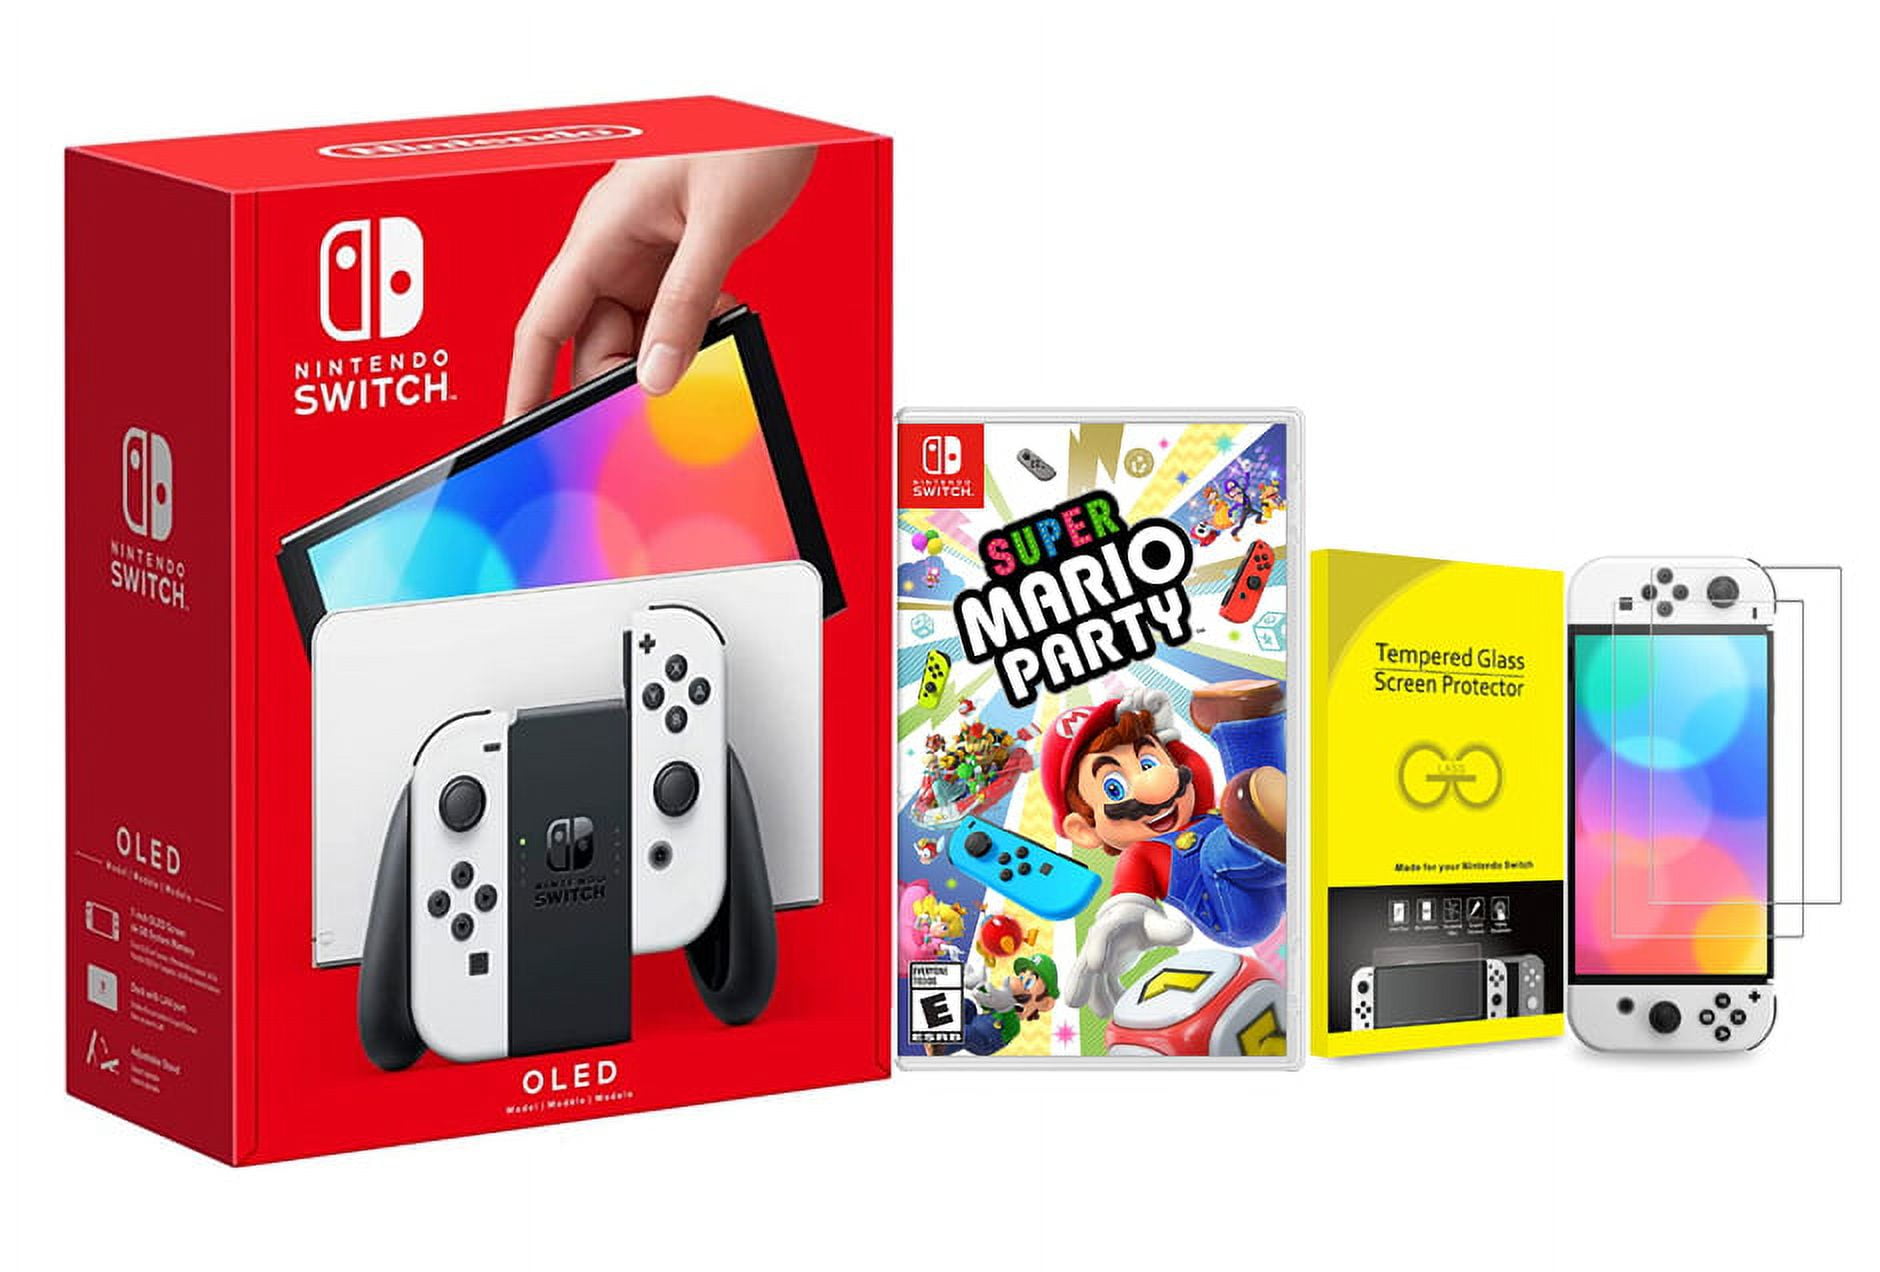 Switch Nintendo Switch Nintendo Switch Mario  Nintendo Switch Oled Console  Games - Game Deals - Aliexpress